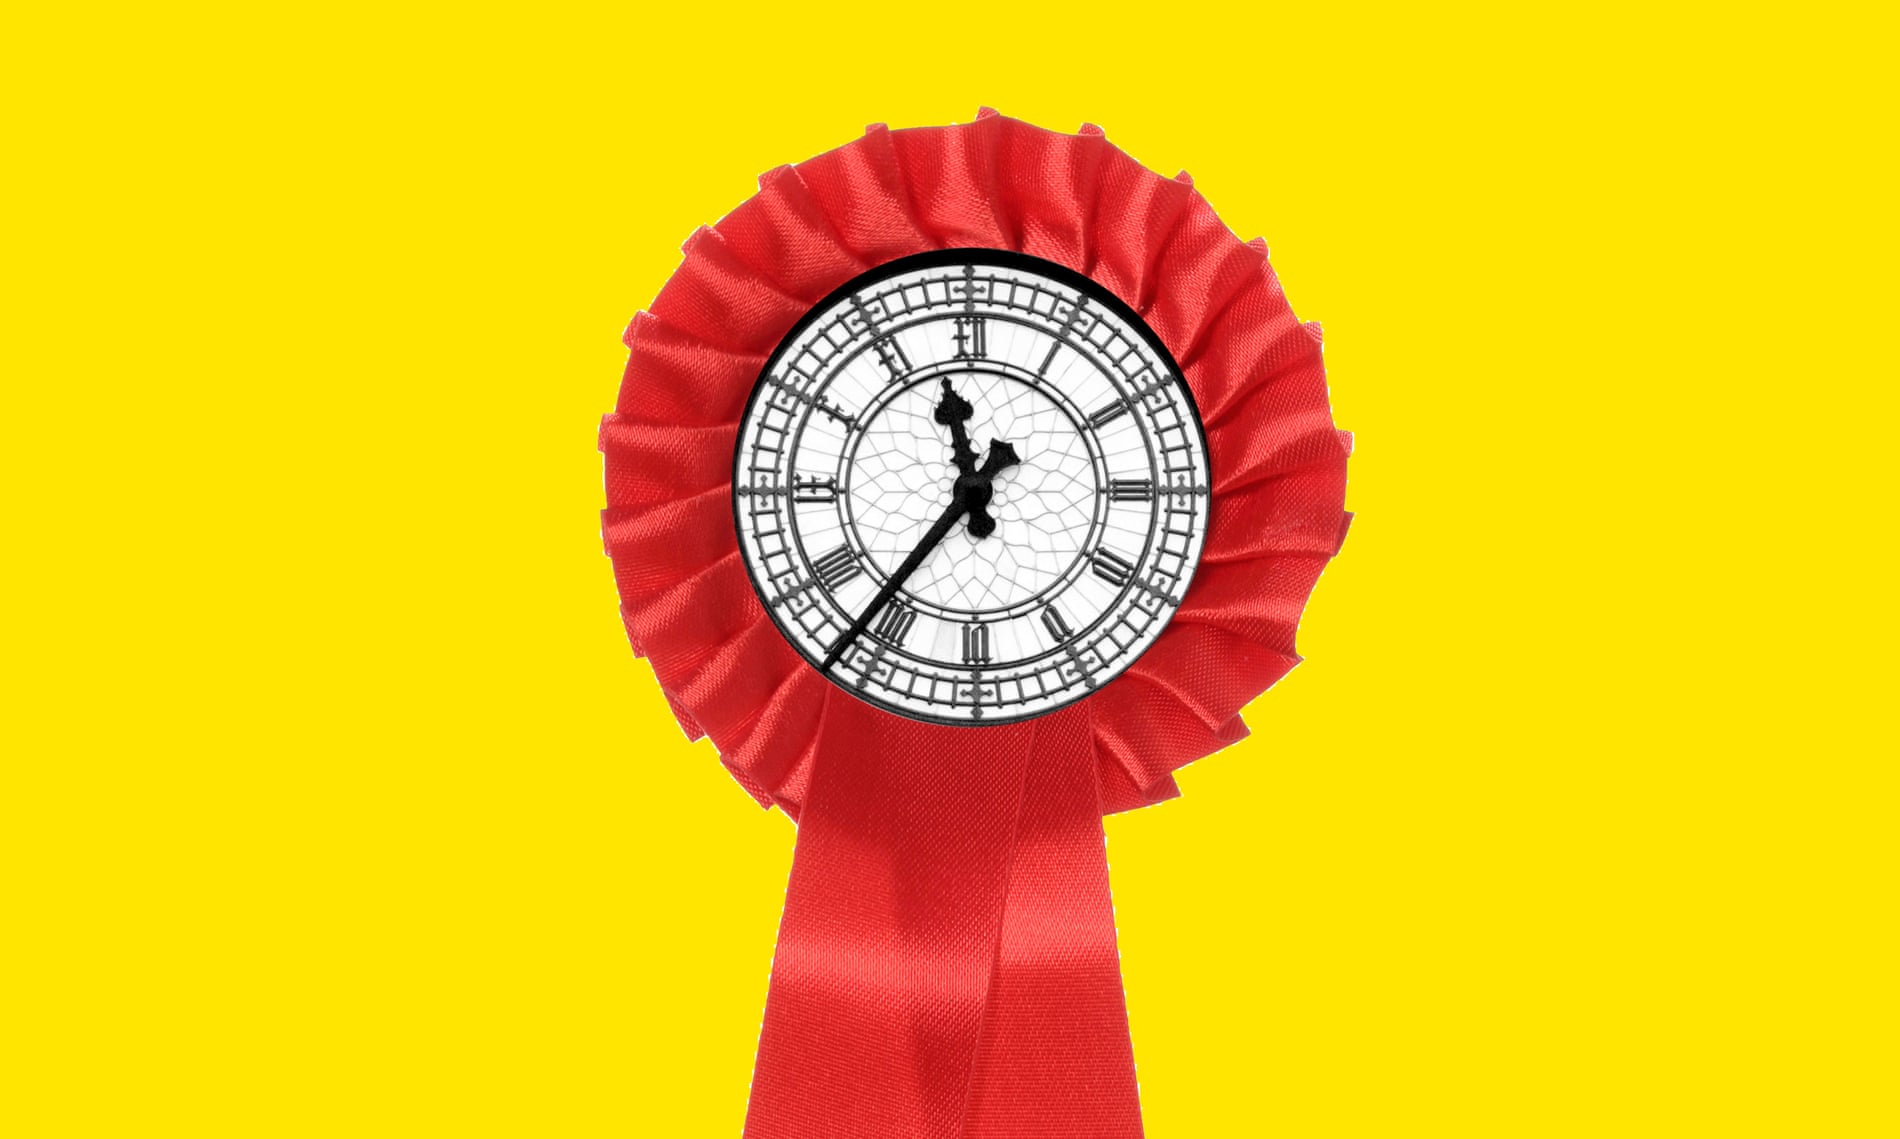 Big Ben inside a red rosette on a yellow background.